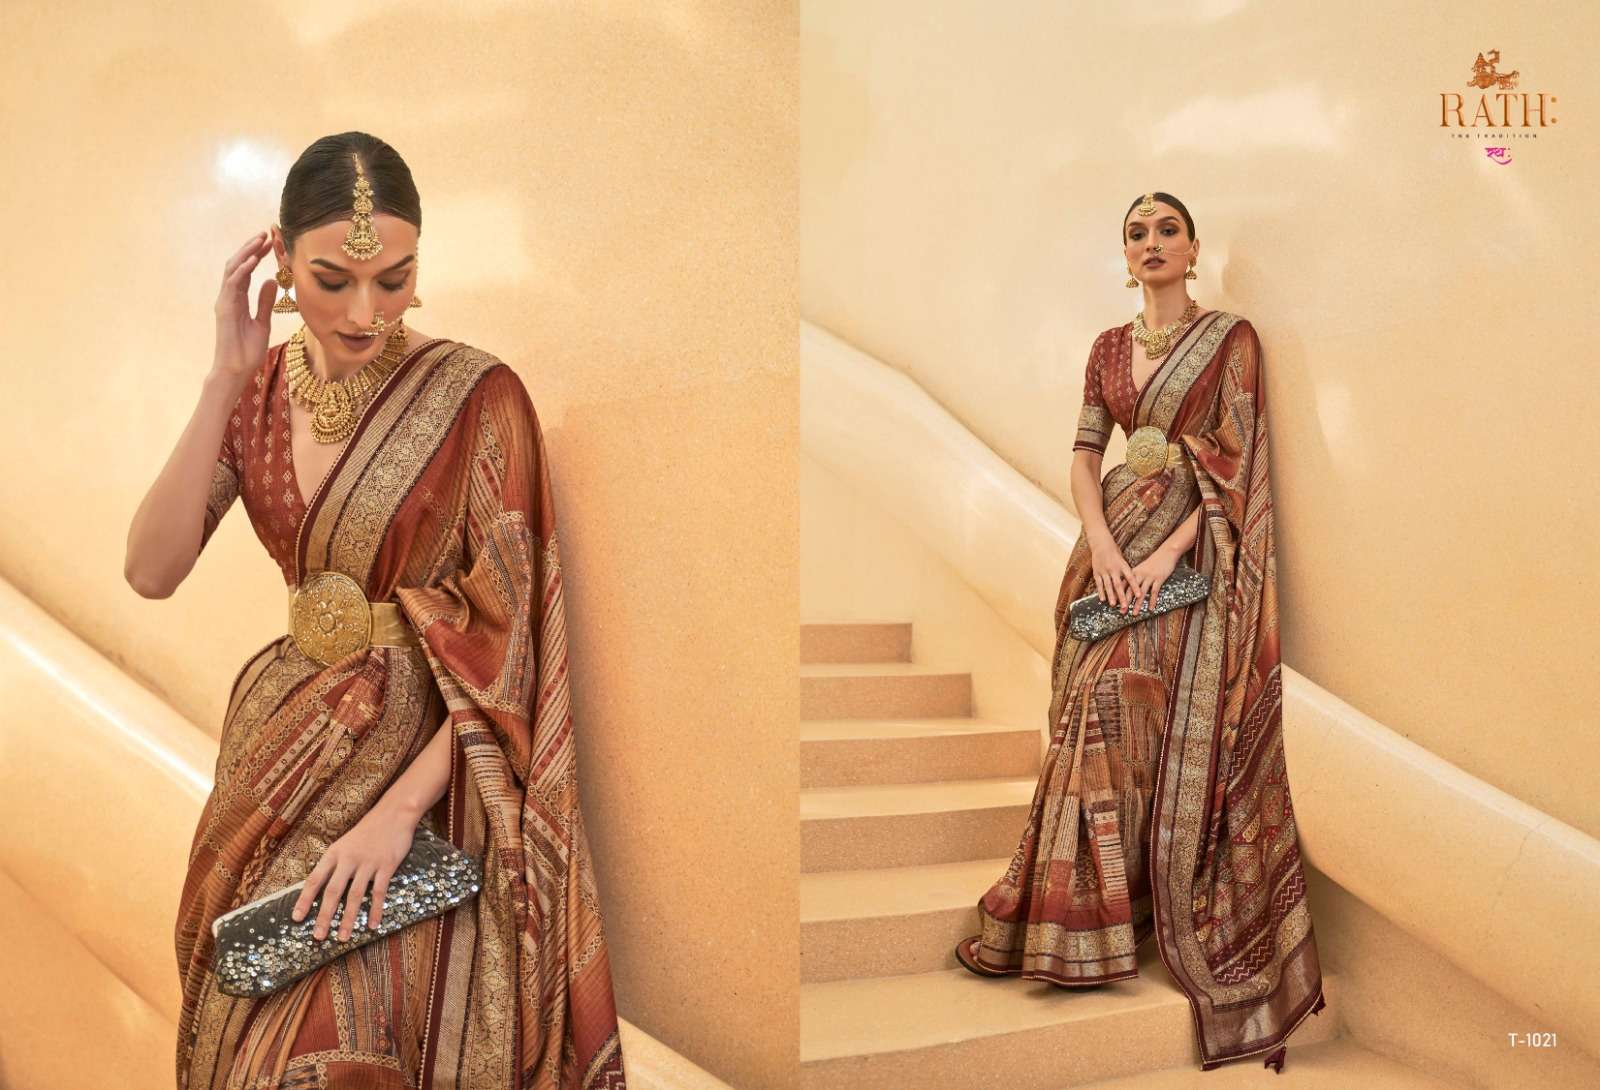 Antra By Rath 1019 To 1027 Series Indian Traditional Wear Collection Beautiful Stylish Fancy Colorful Party Wear & Occasional Wear Brasso Sarees At Wholesale Price